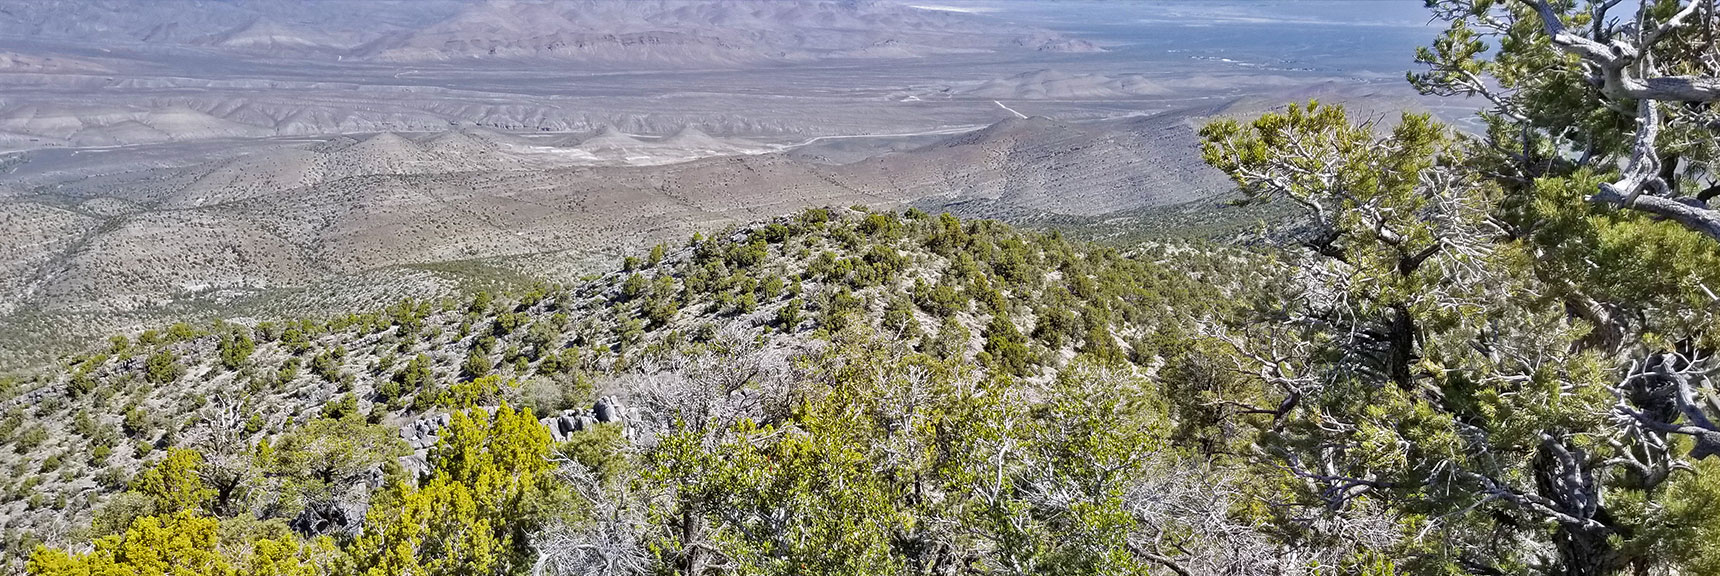 View to Origin Point at Intersection of Kyle Canyon & Harris Springs Rd from La Madre Mountain Nevada Northern Approach and High Points